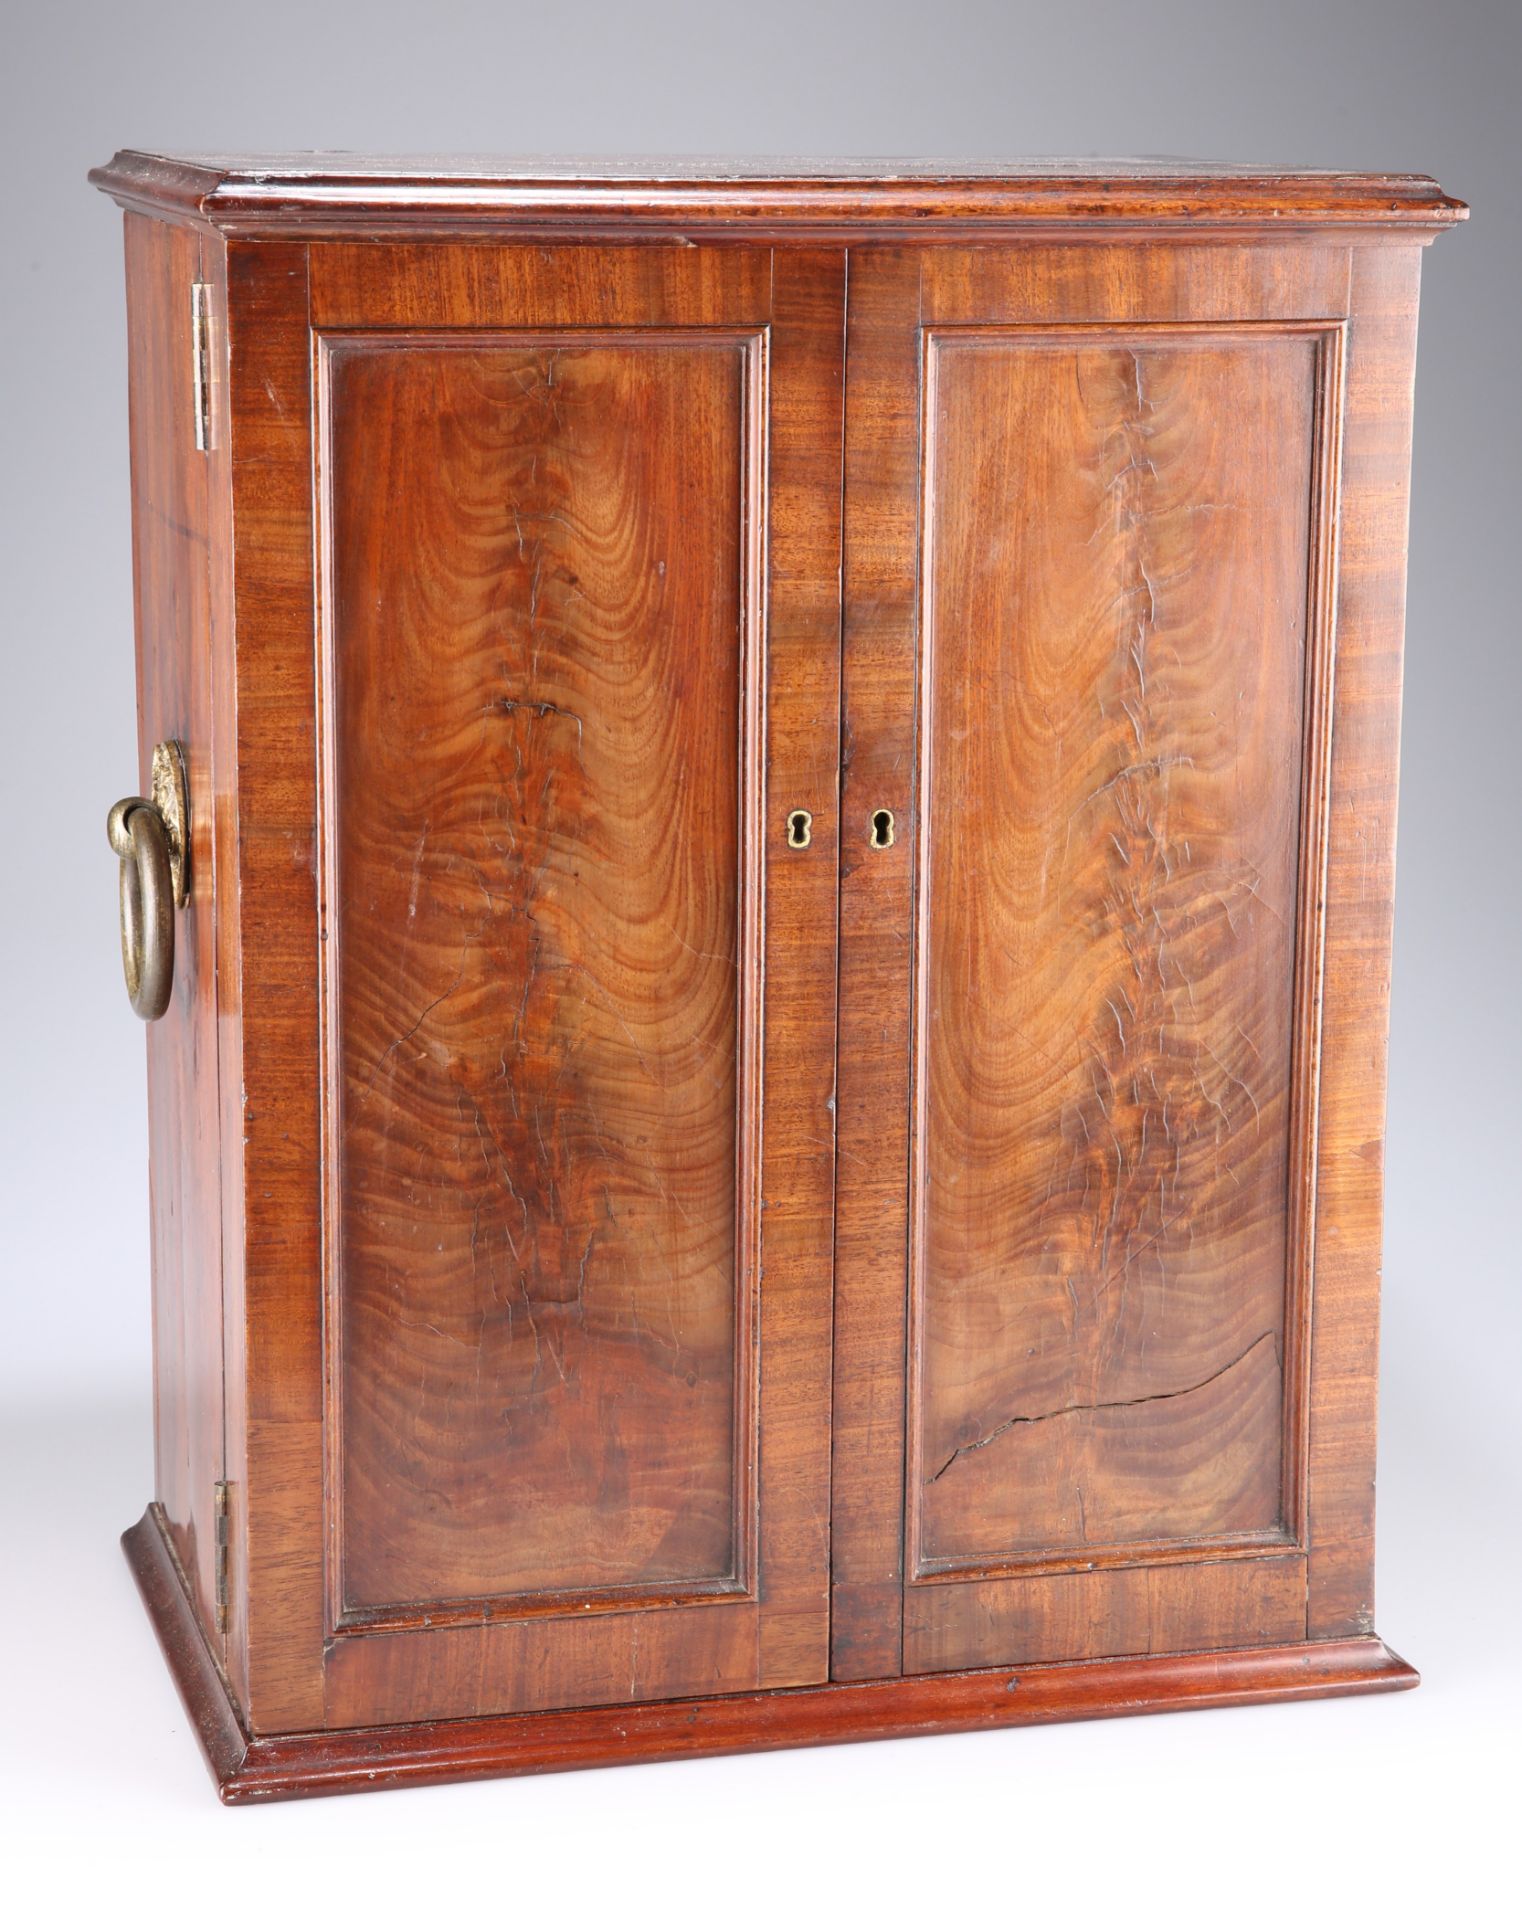 AN OFFICERS' WALNUT CAMPAIGN TOILETRY CABINET